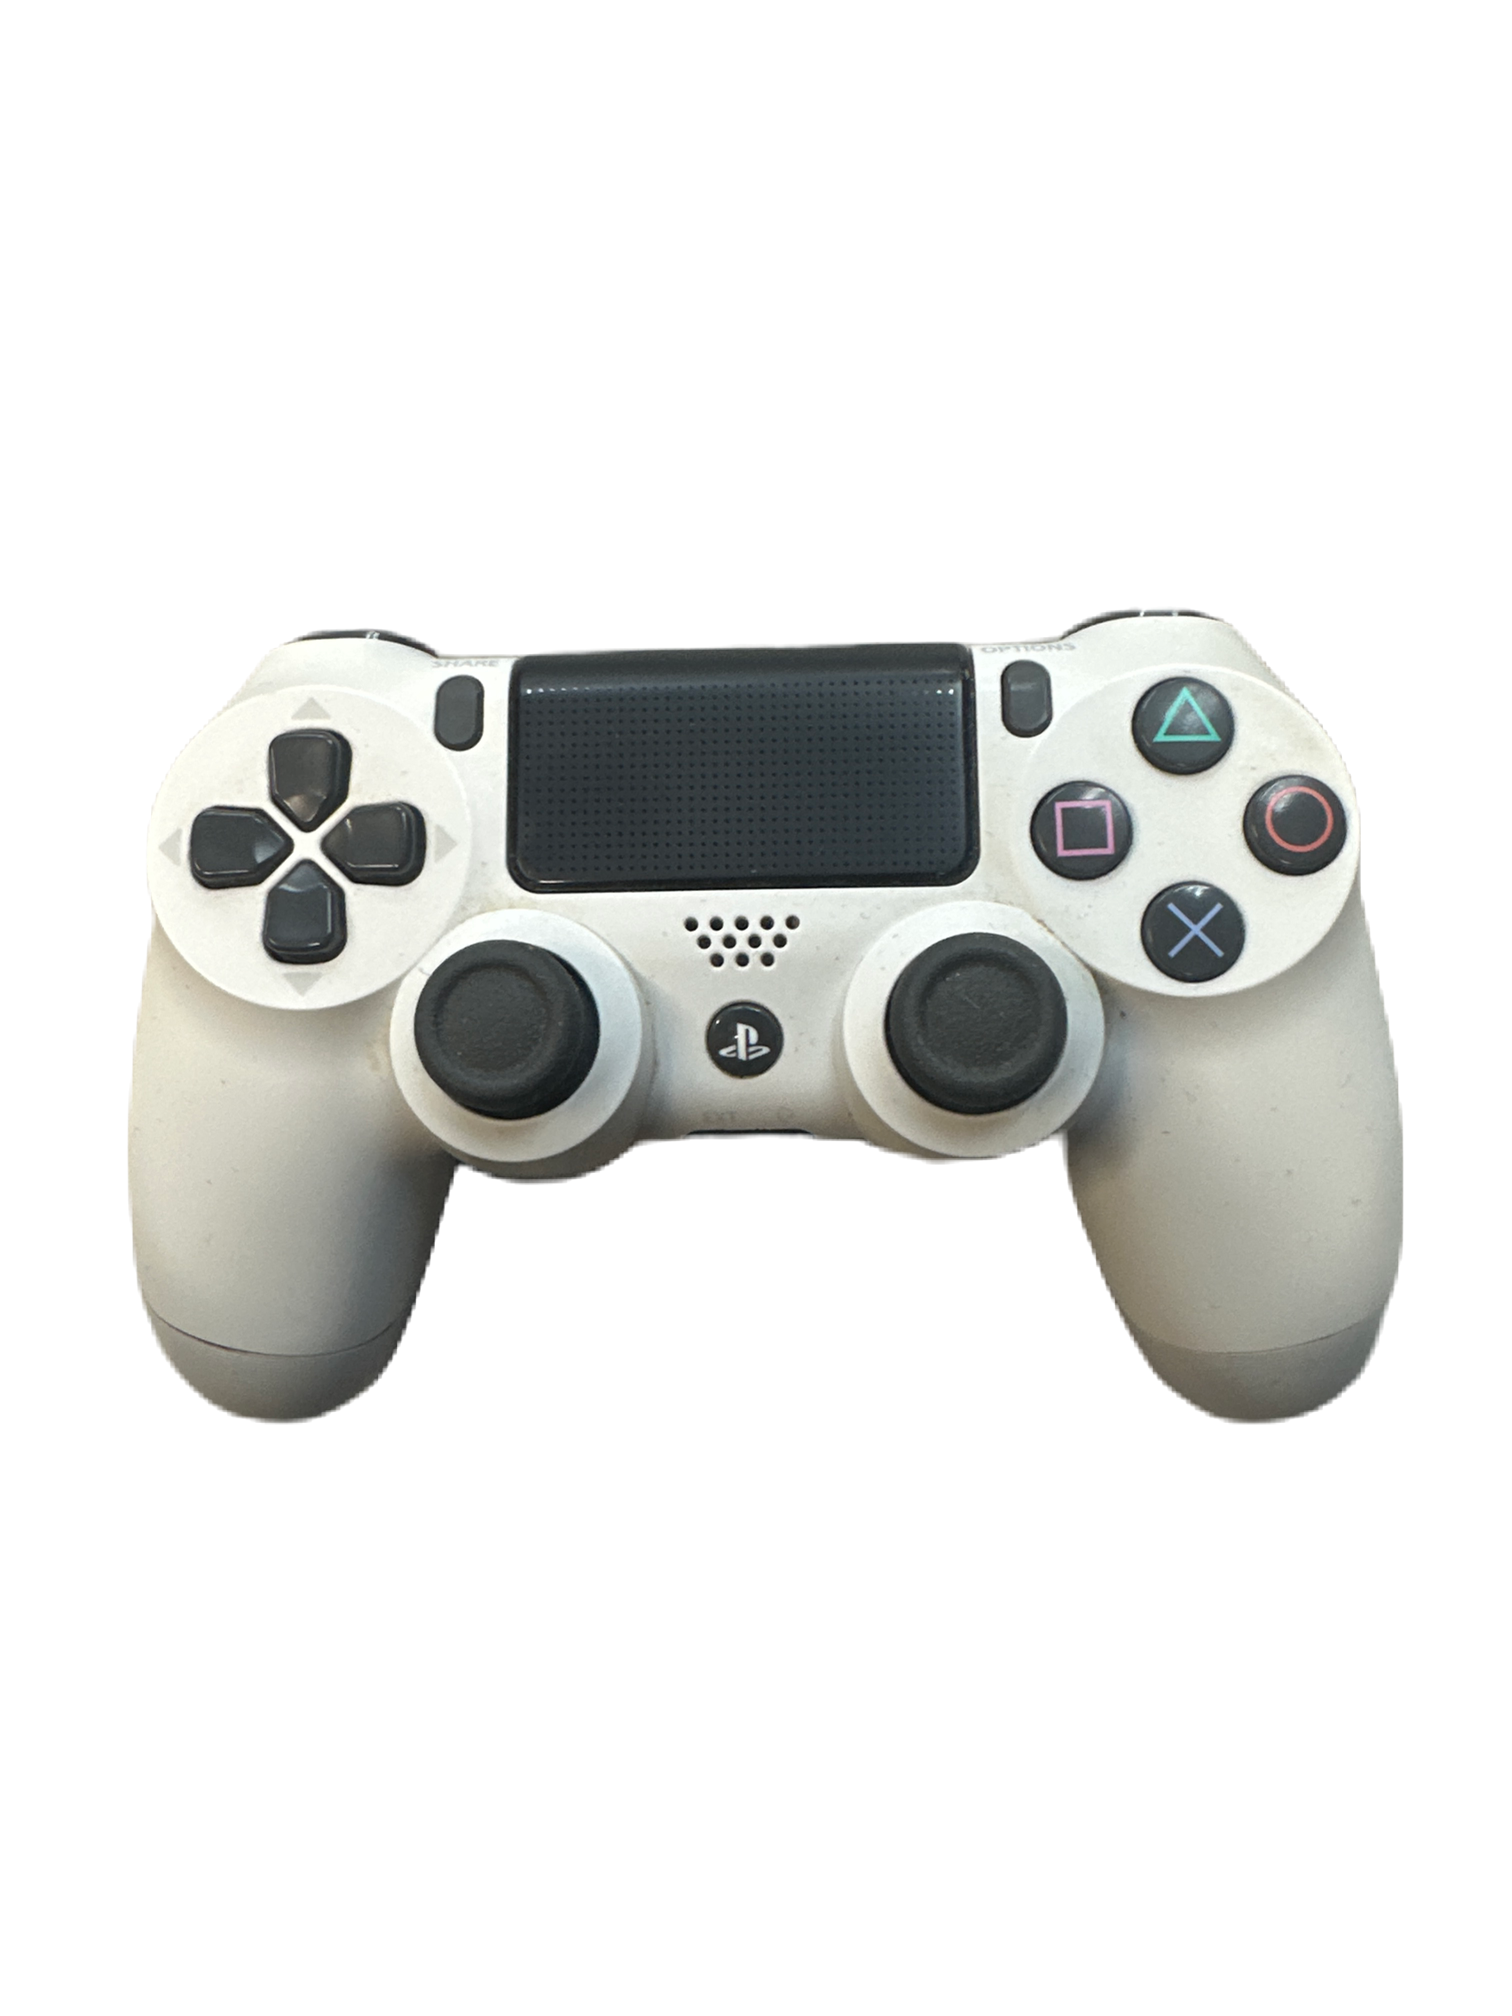 Playstation 4 Controller - White - Unboxed, Sony